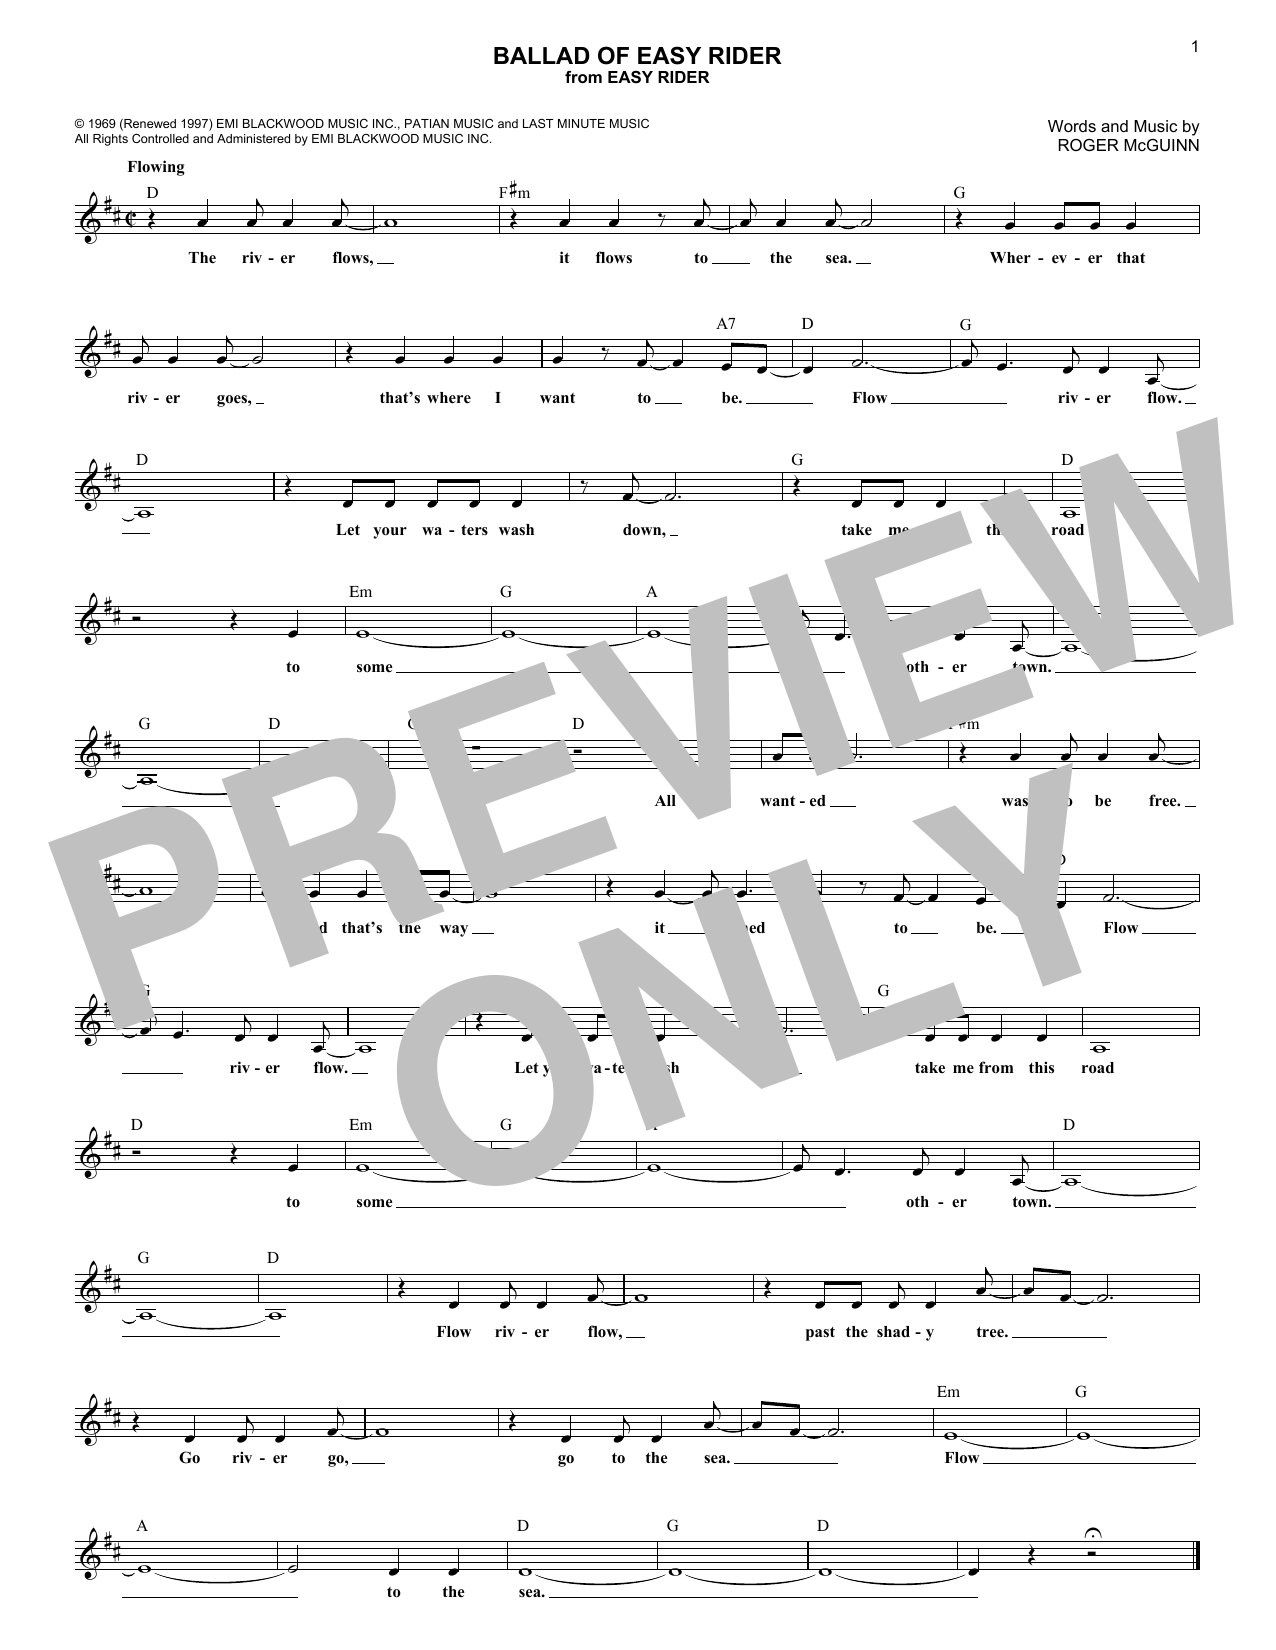 Download The Byrds Ballad Of Easy Rider Sheet Music